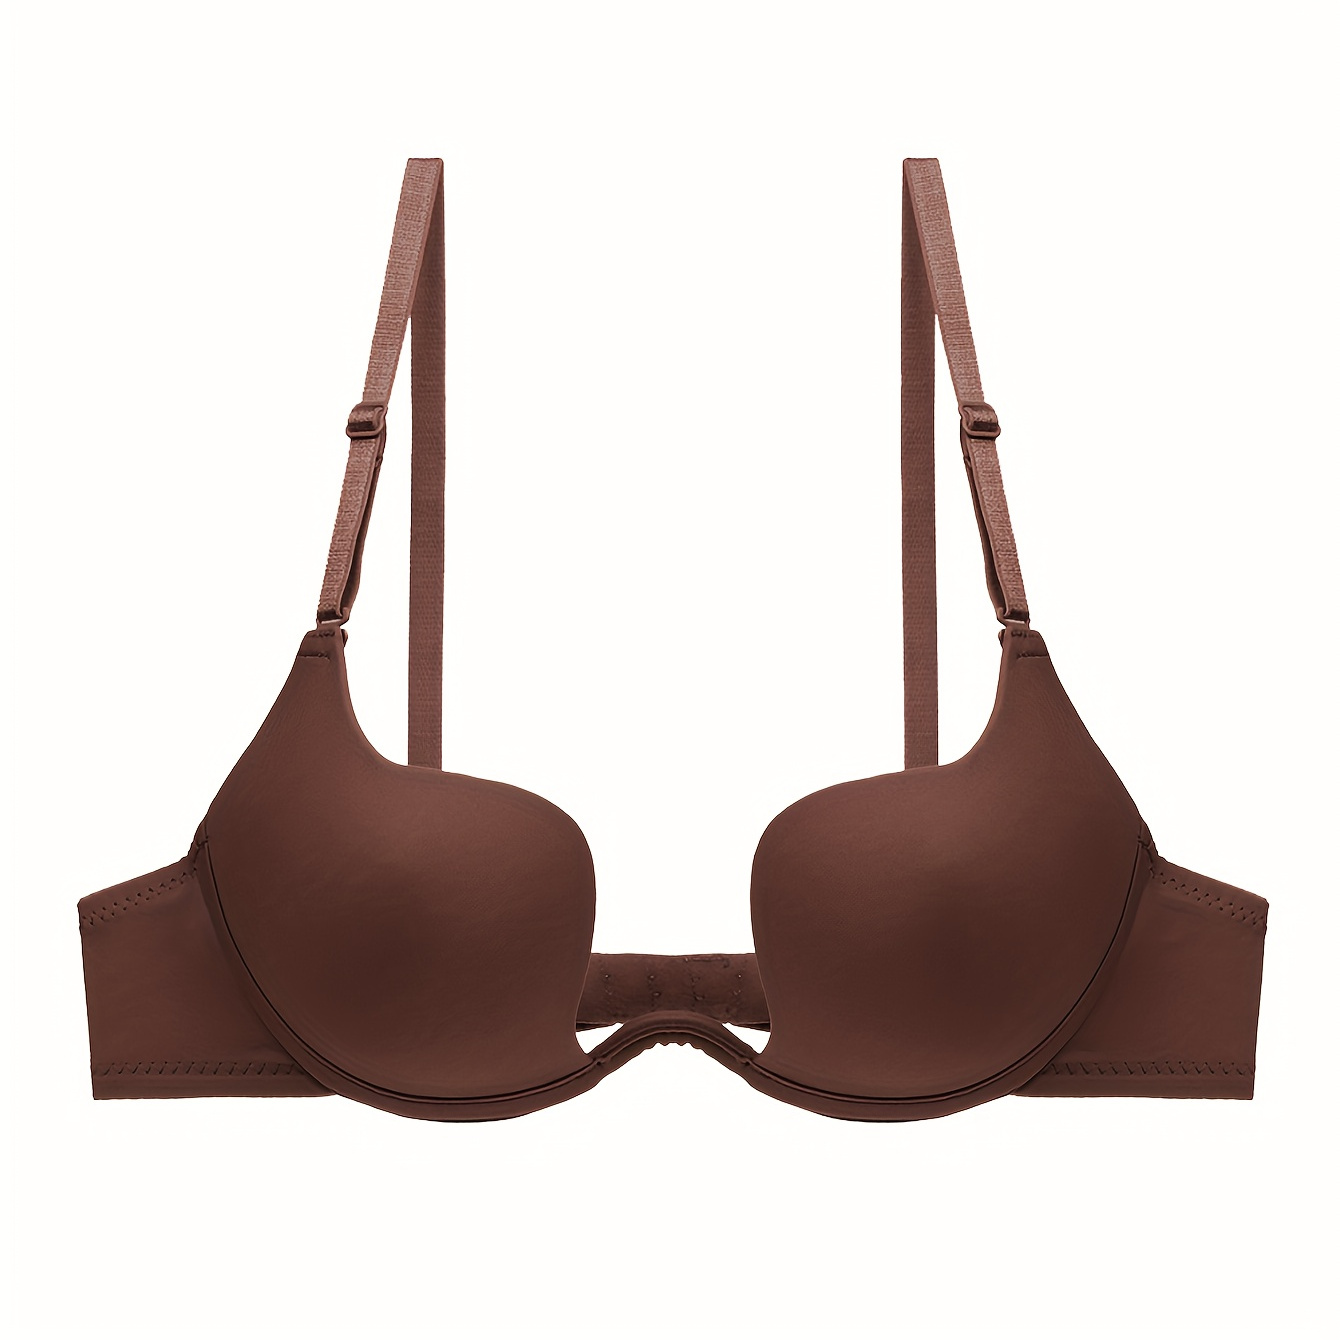 Low Plunge Push Up Bra With Clear Straps Low Cut Convertible